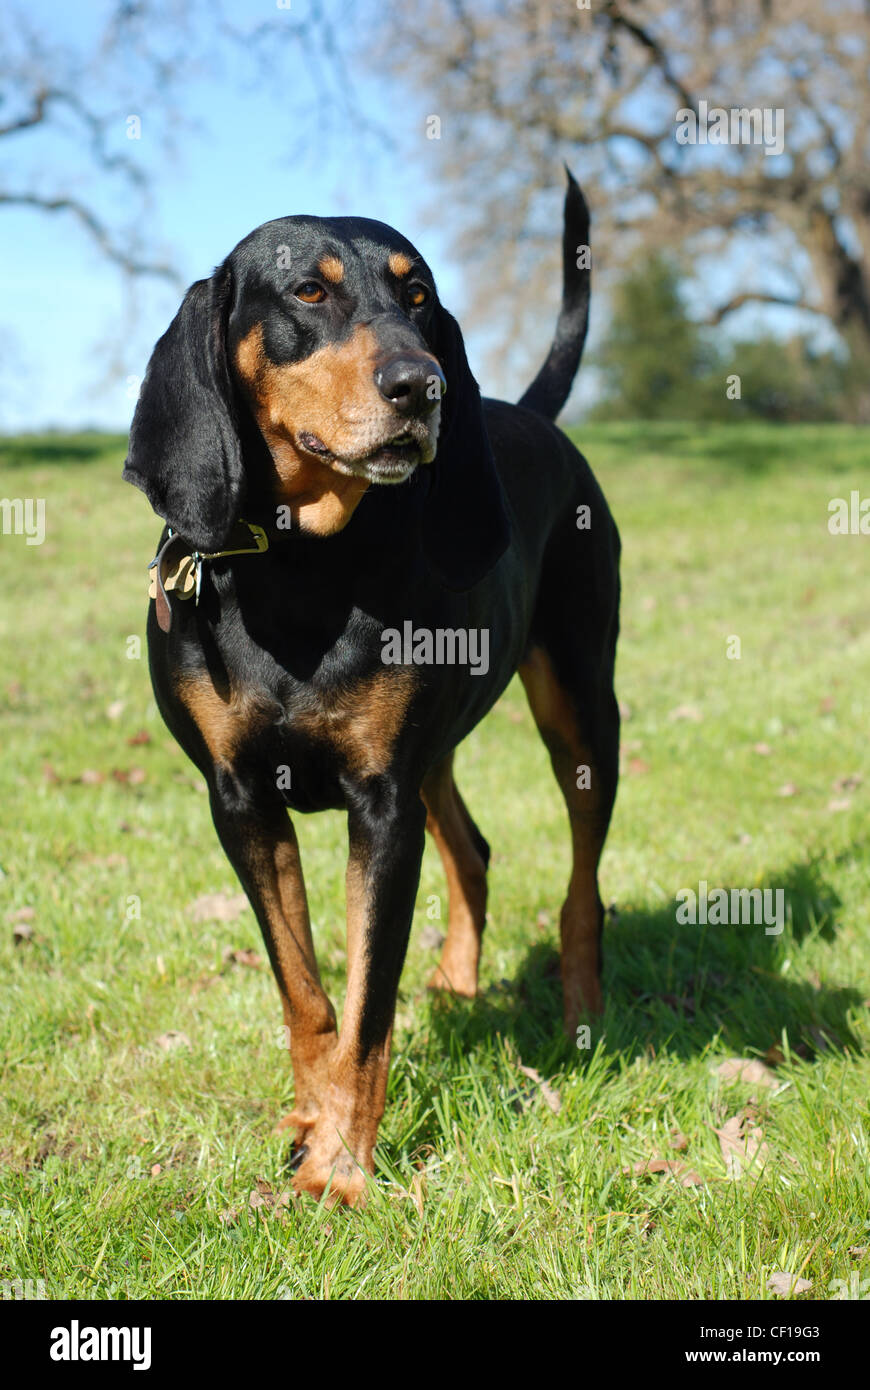 American Black and Tan Coonhound portrait, outdoor full body Stock Photo